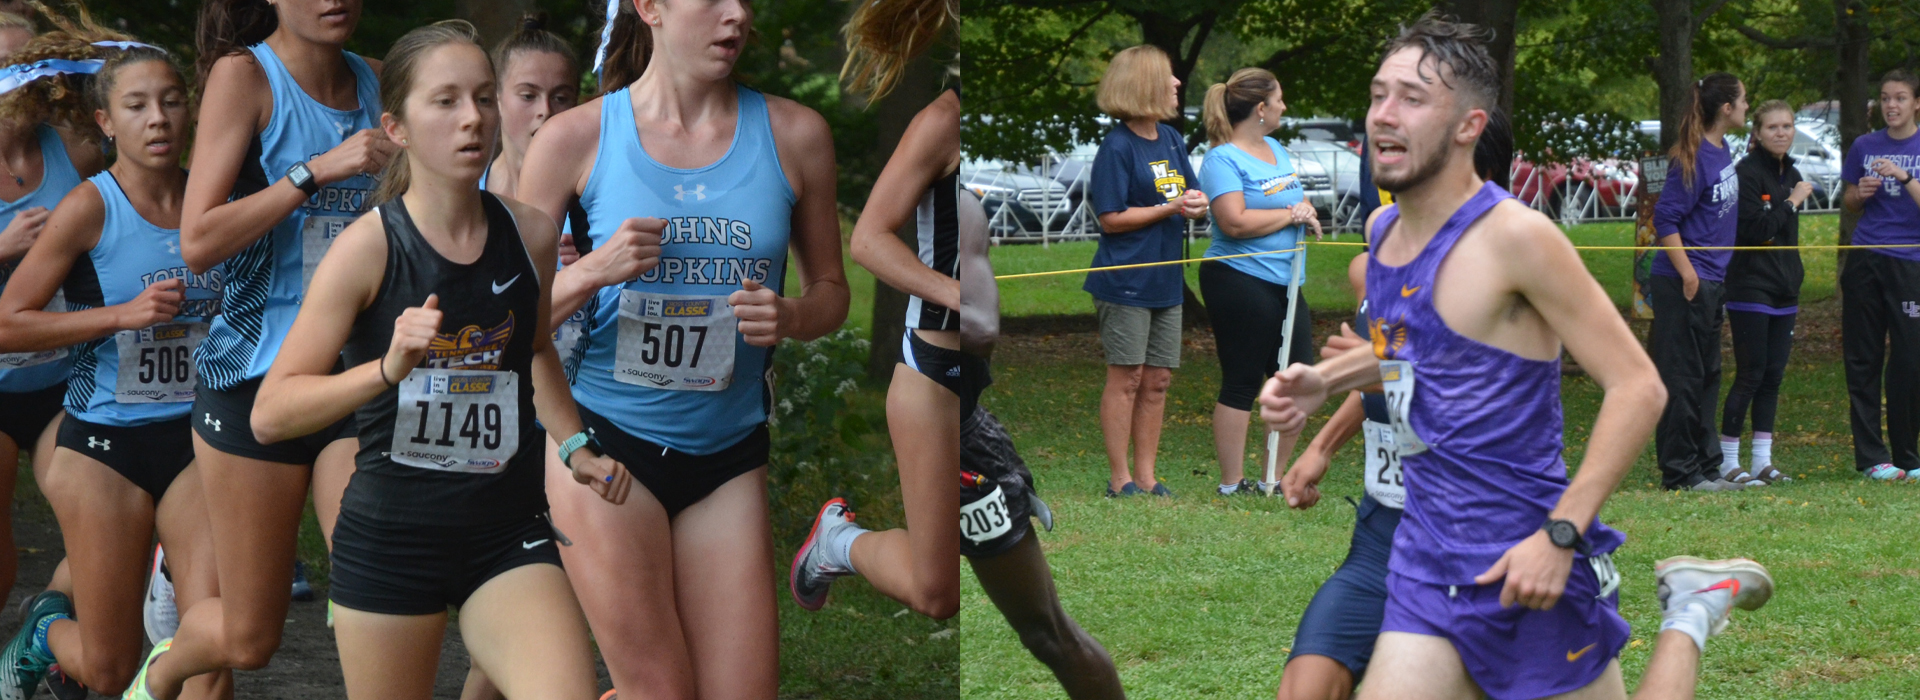 Tech cross country teams deliver strong results at Live in Lou Classic